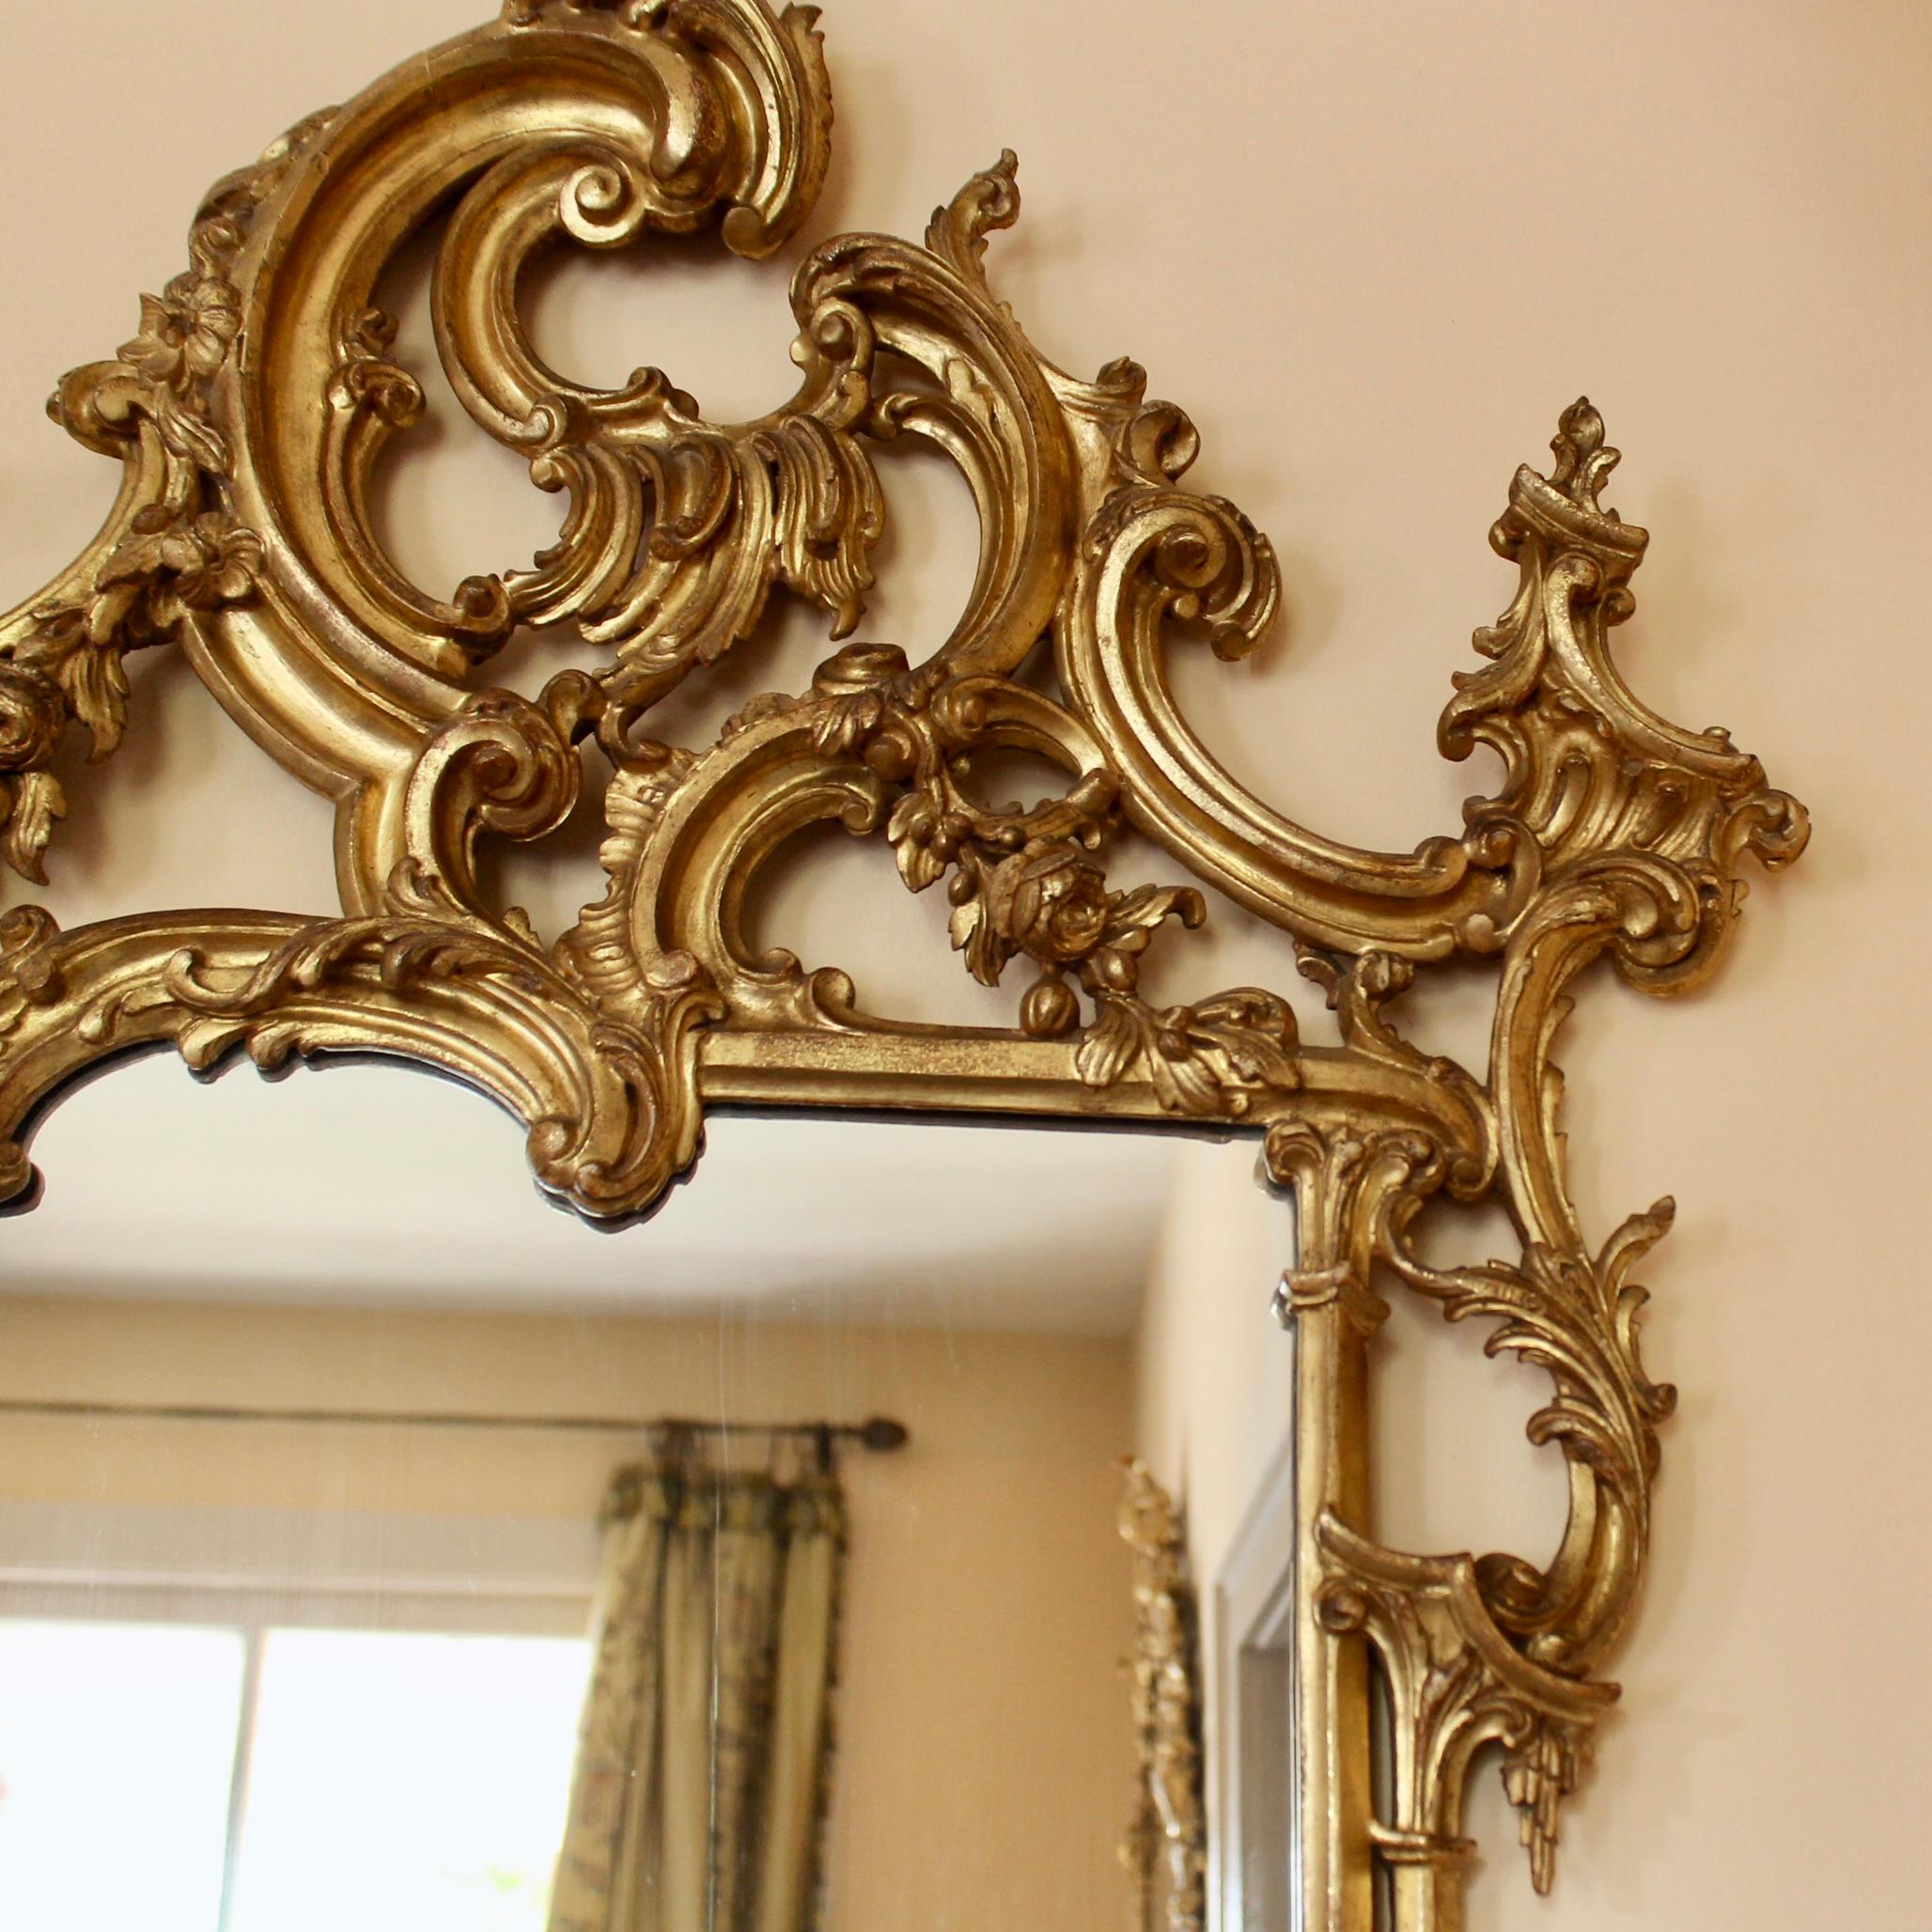 Italian Carved And Gilded Chippendale Rococo Style Mirror In Good Condition For Sale In Free Union, VA